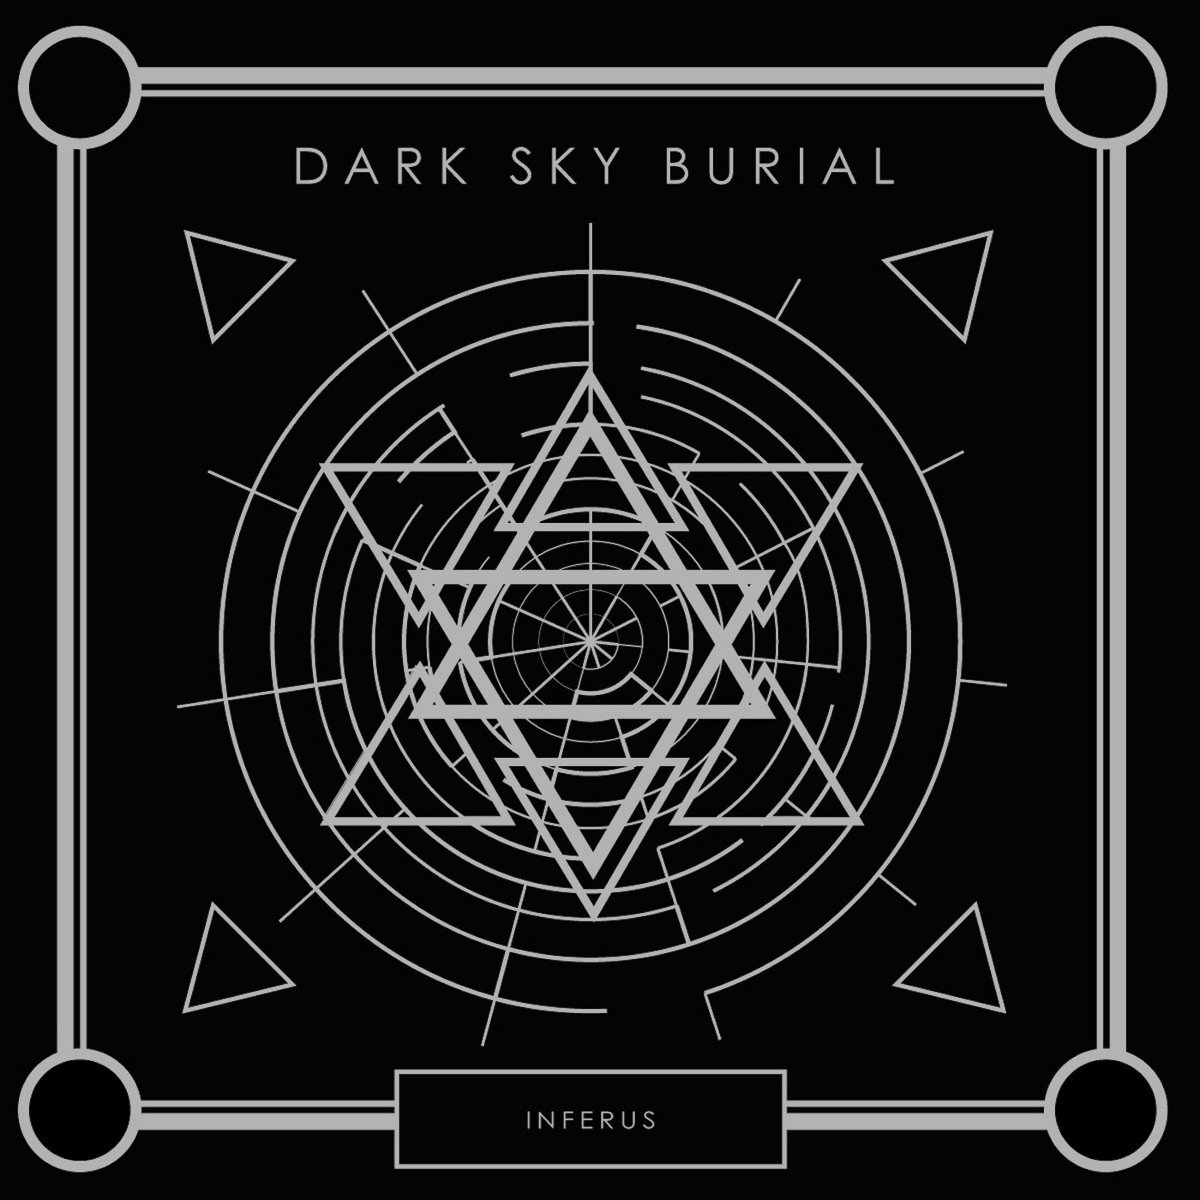 Begin 2023 with a surprise release of new material and remixes from Shane Embury's electronic @darkskyburial. darkskyburial.bandcamp.com/album/inferus #DarkSkyBurial #ShaneEmbury #ElectronicMusic